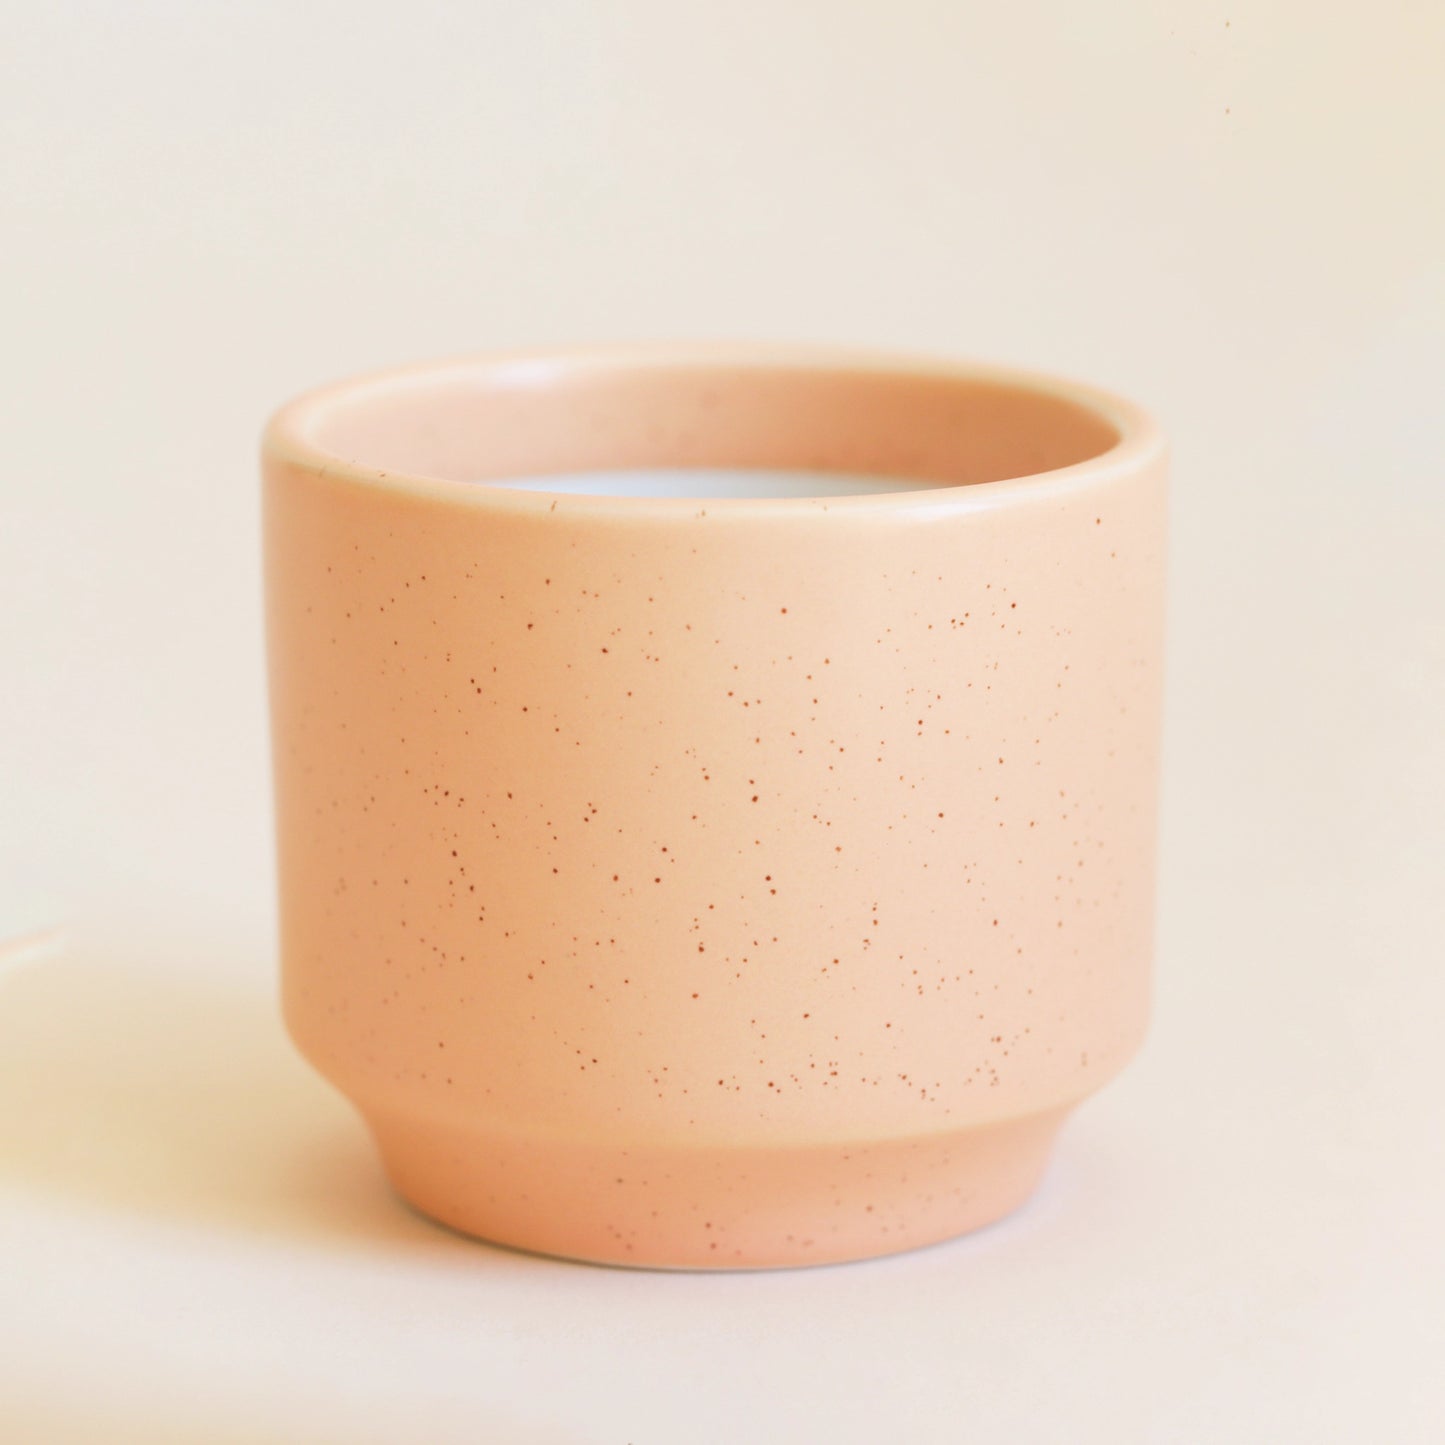 On an ivory background is a ceramic planter in a salmon, pinkish orange shade with a speckle detail and a tapered base.